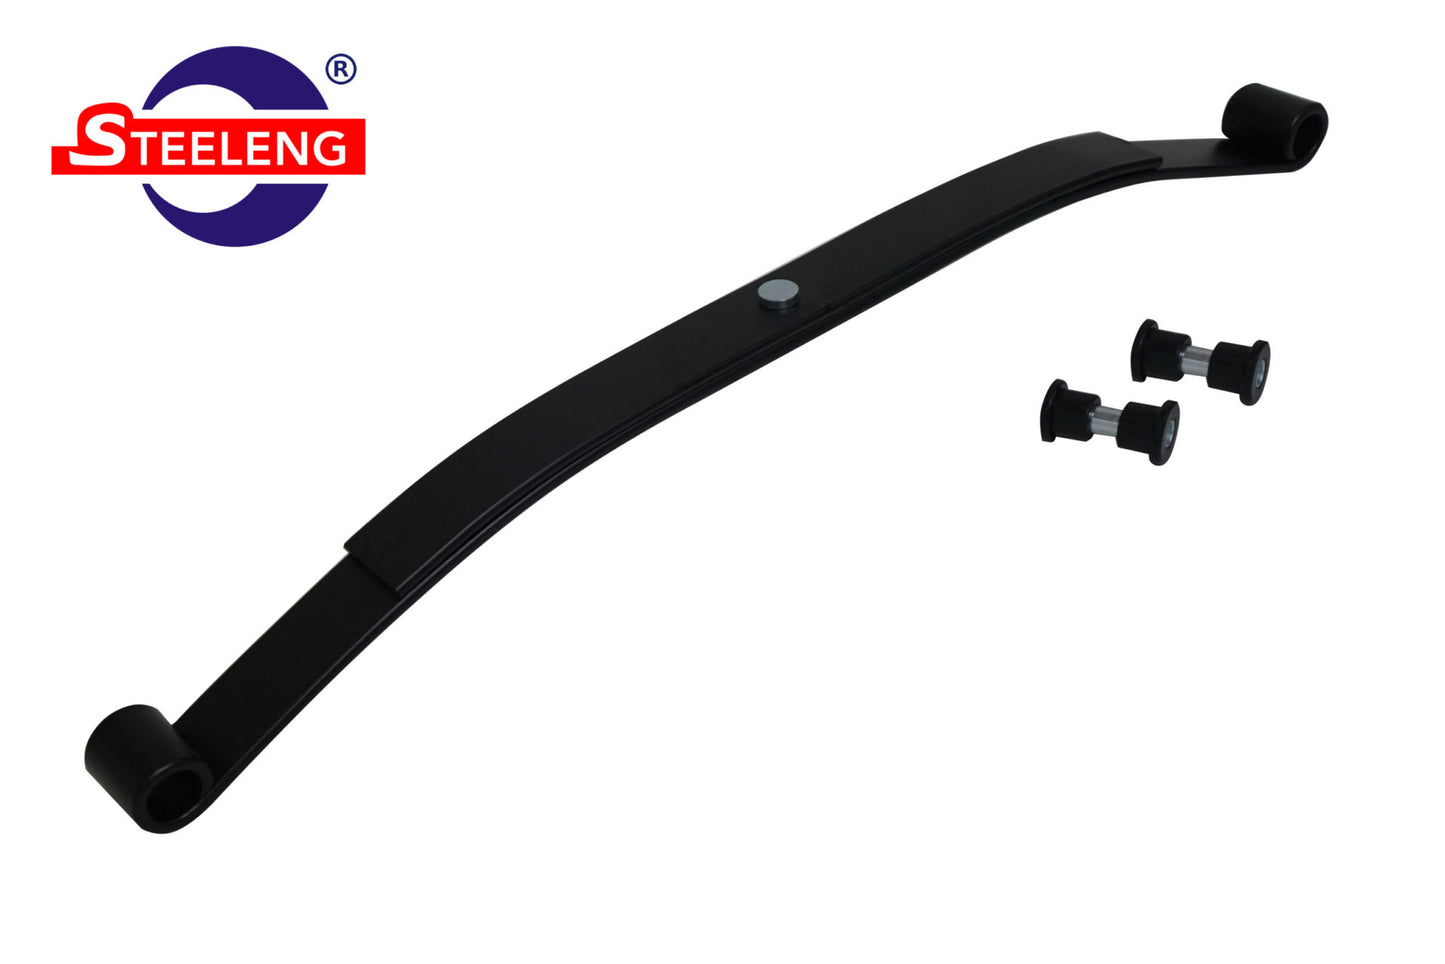 LSDS02 – SGC Front Leaf Spring Heavy Duty for Club Car DS